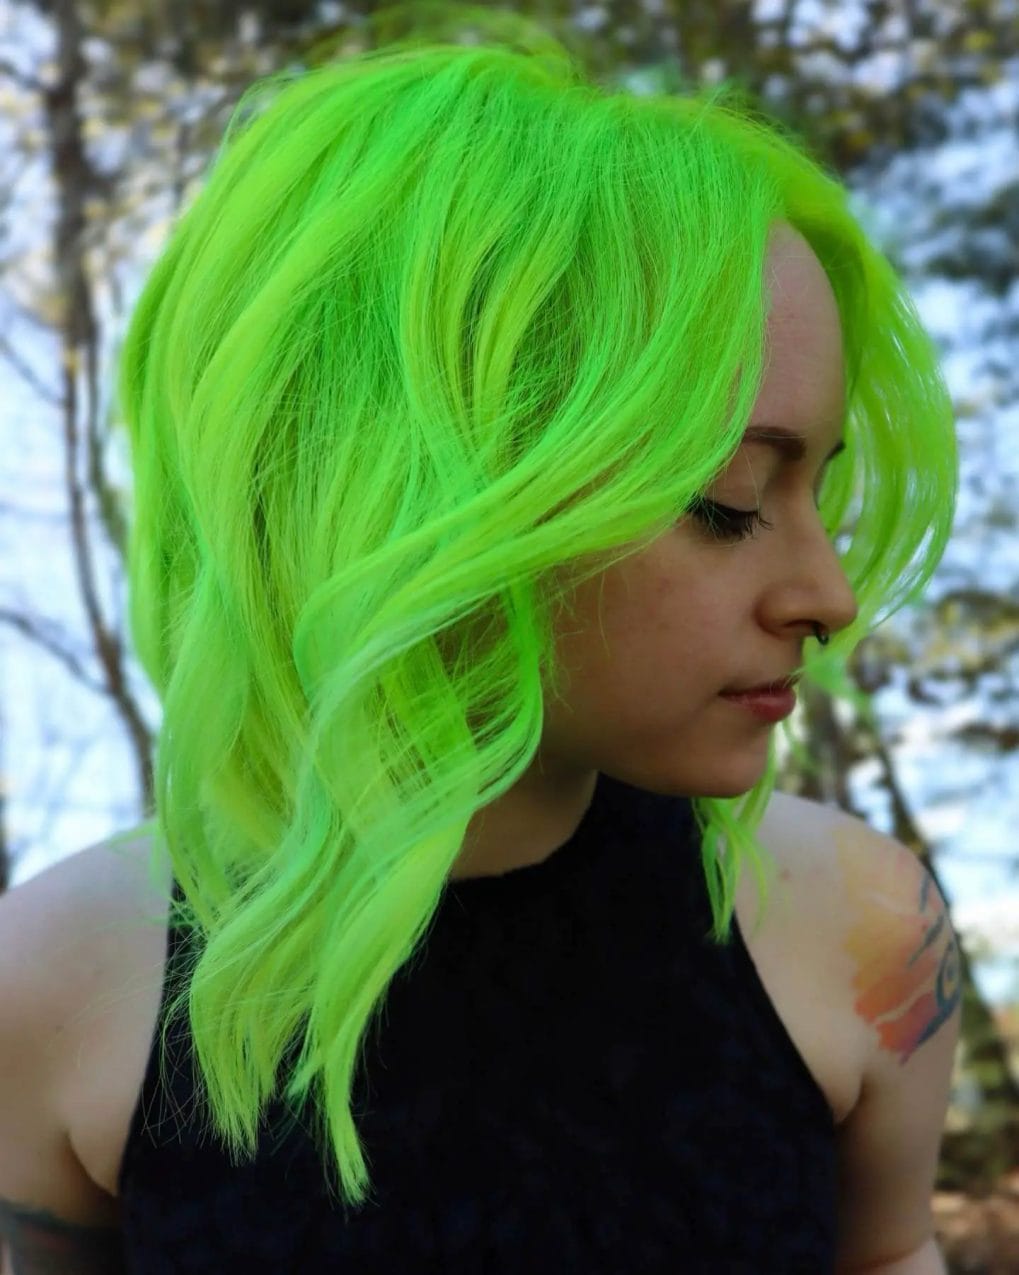 Electric neon green in a tousled mid-length cut.